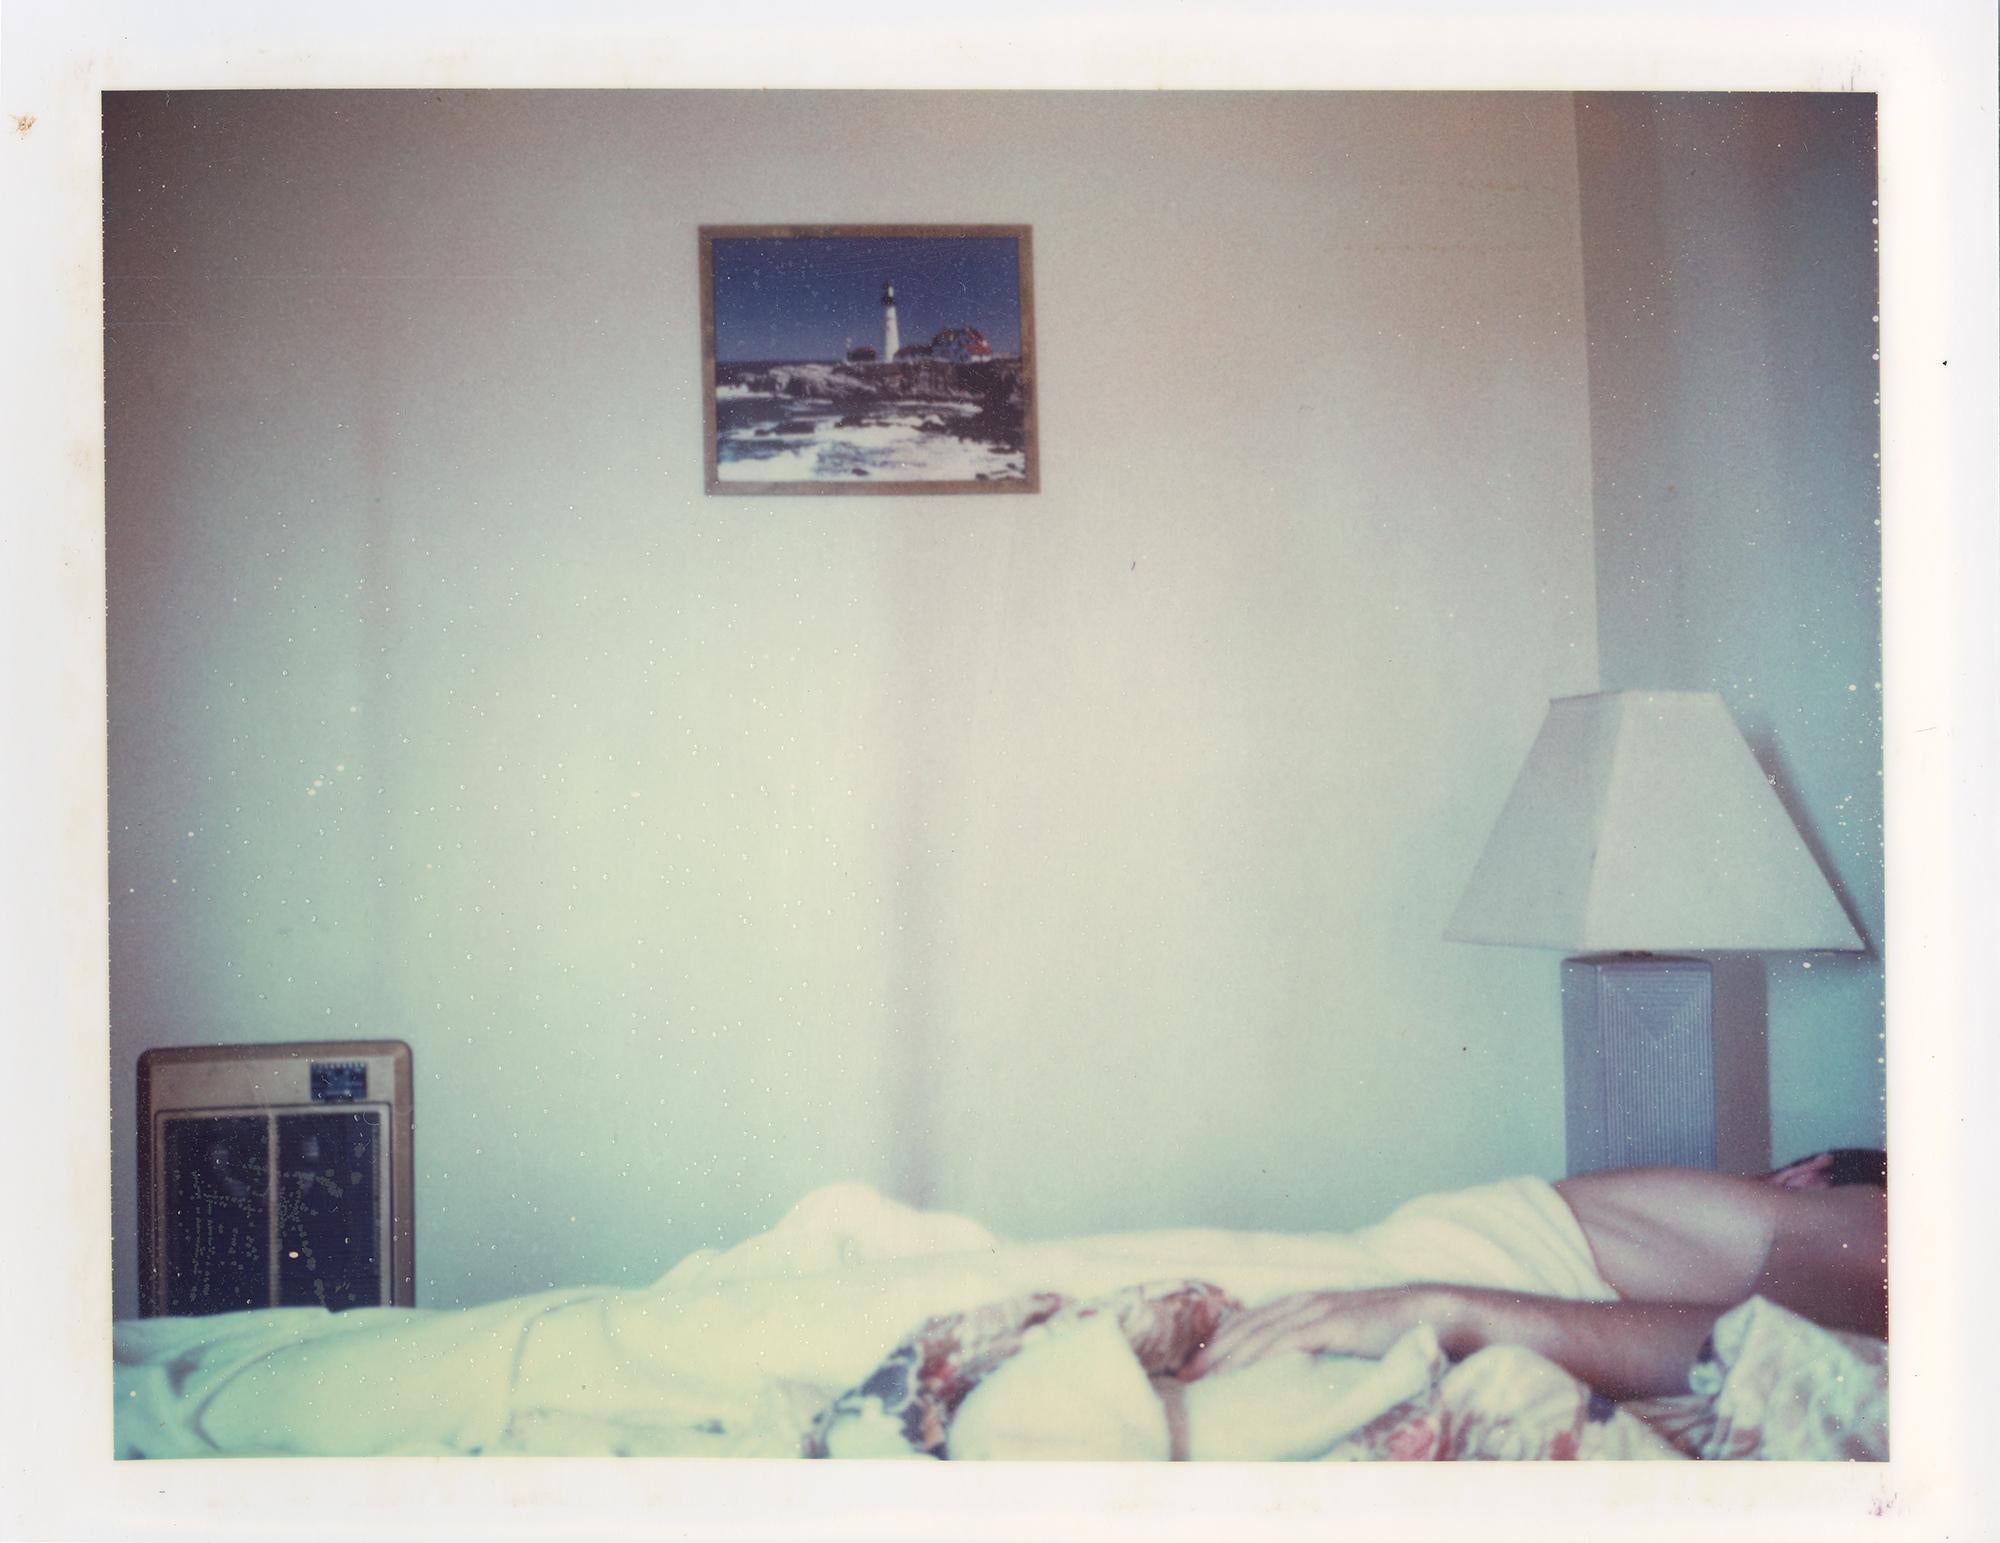 Stefanie Schneider Figurative Photograph - 'Dreaming of the Lighthouse' based on an original Polaroid, 21st Century, Color